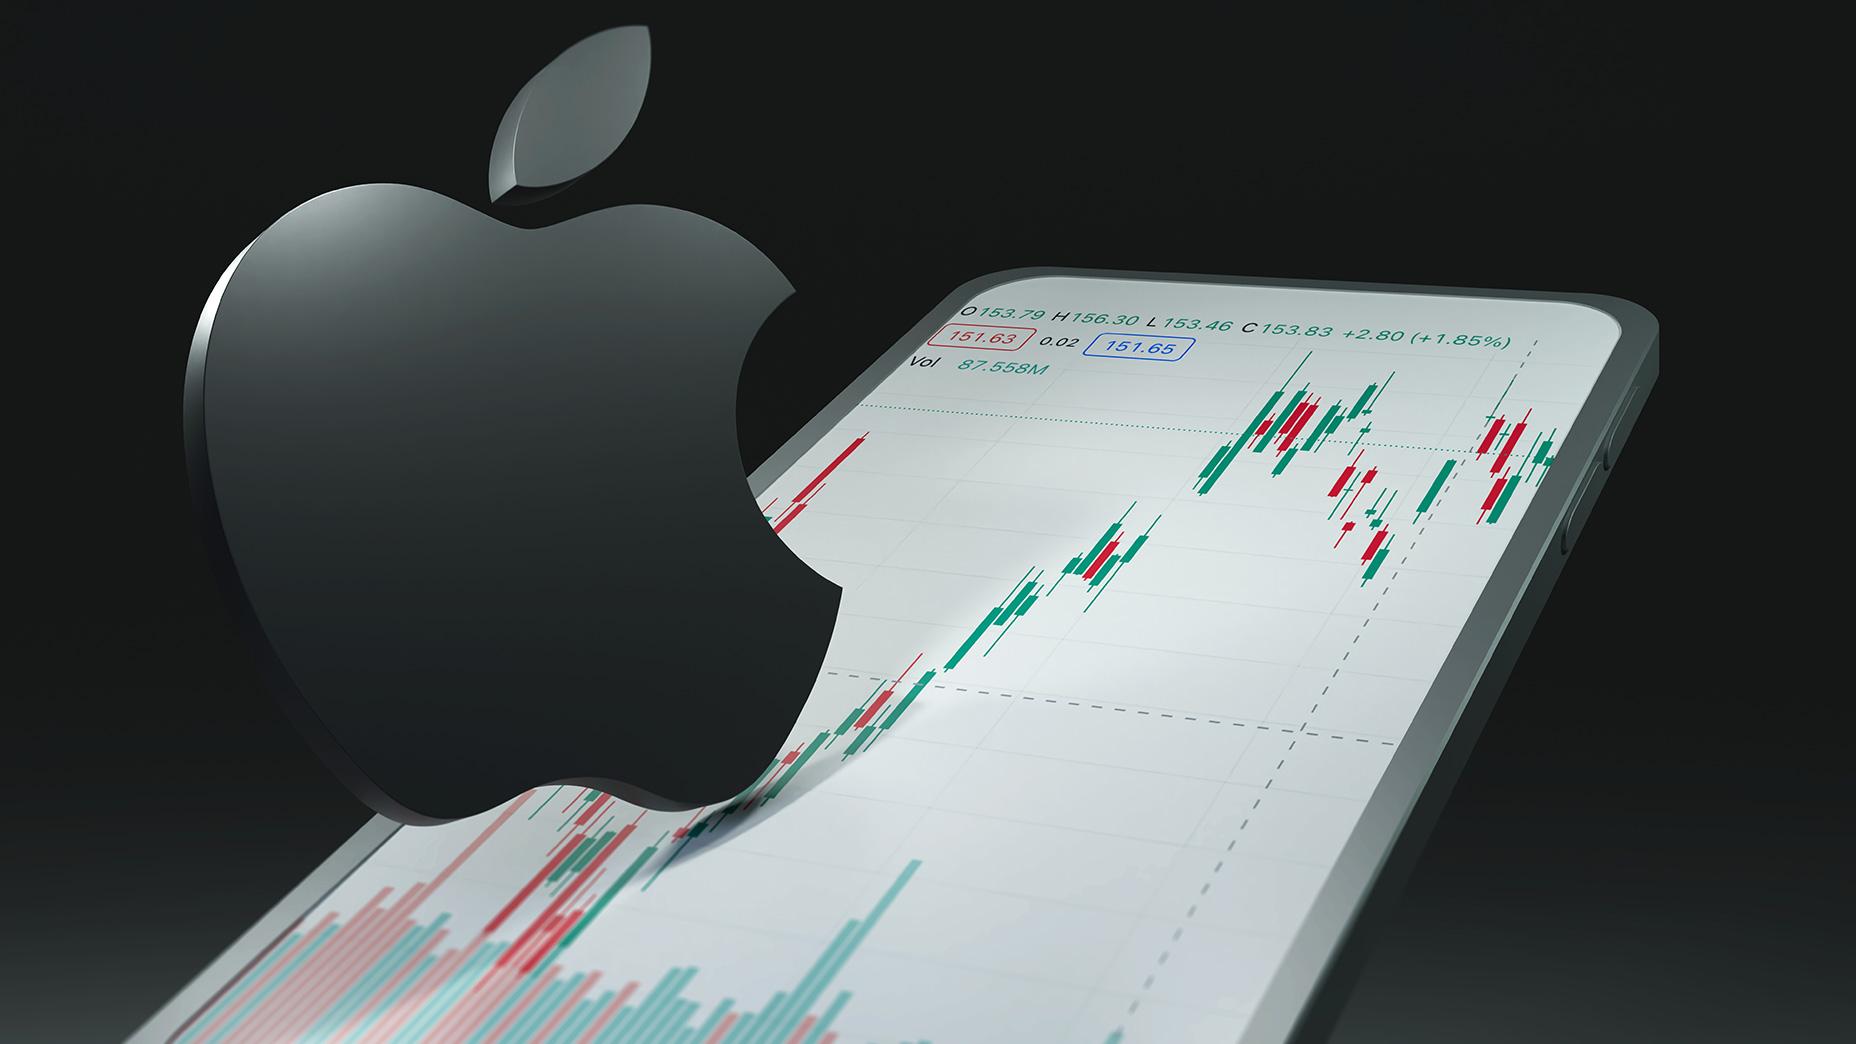 Apple Stock: A Look into the World's Most Valuable Company